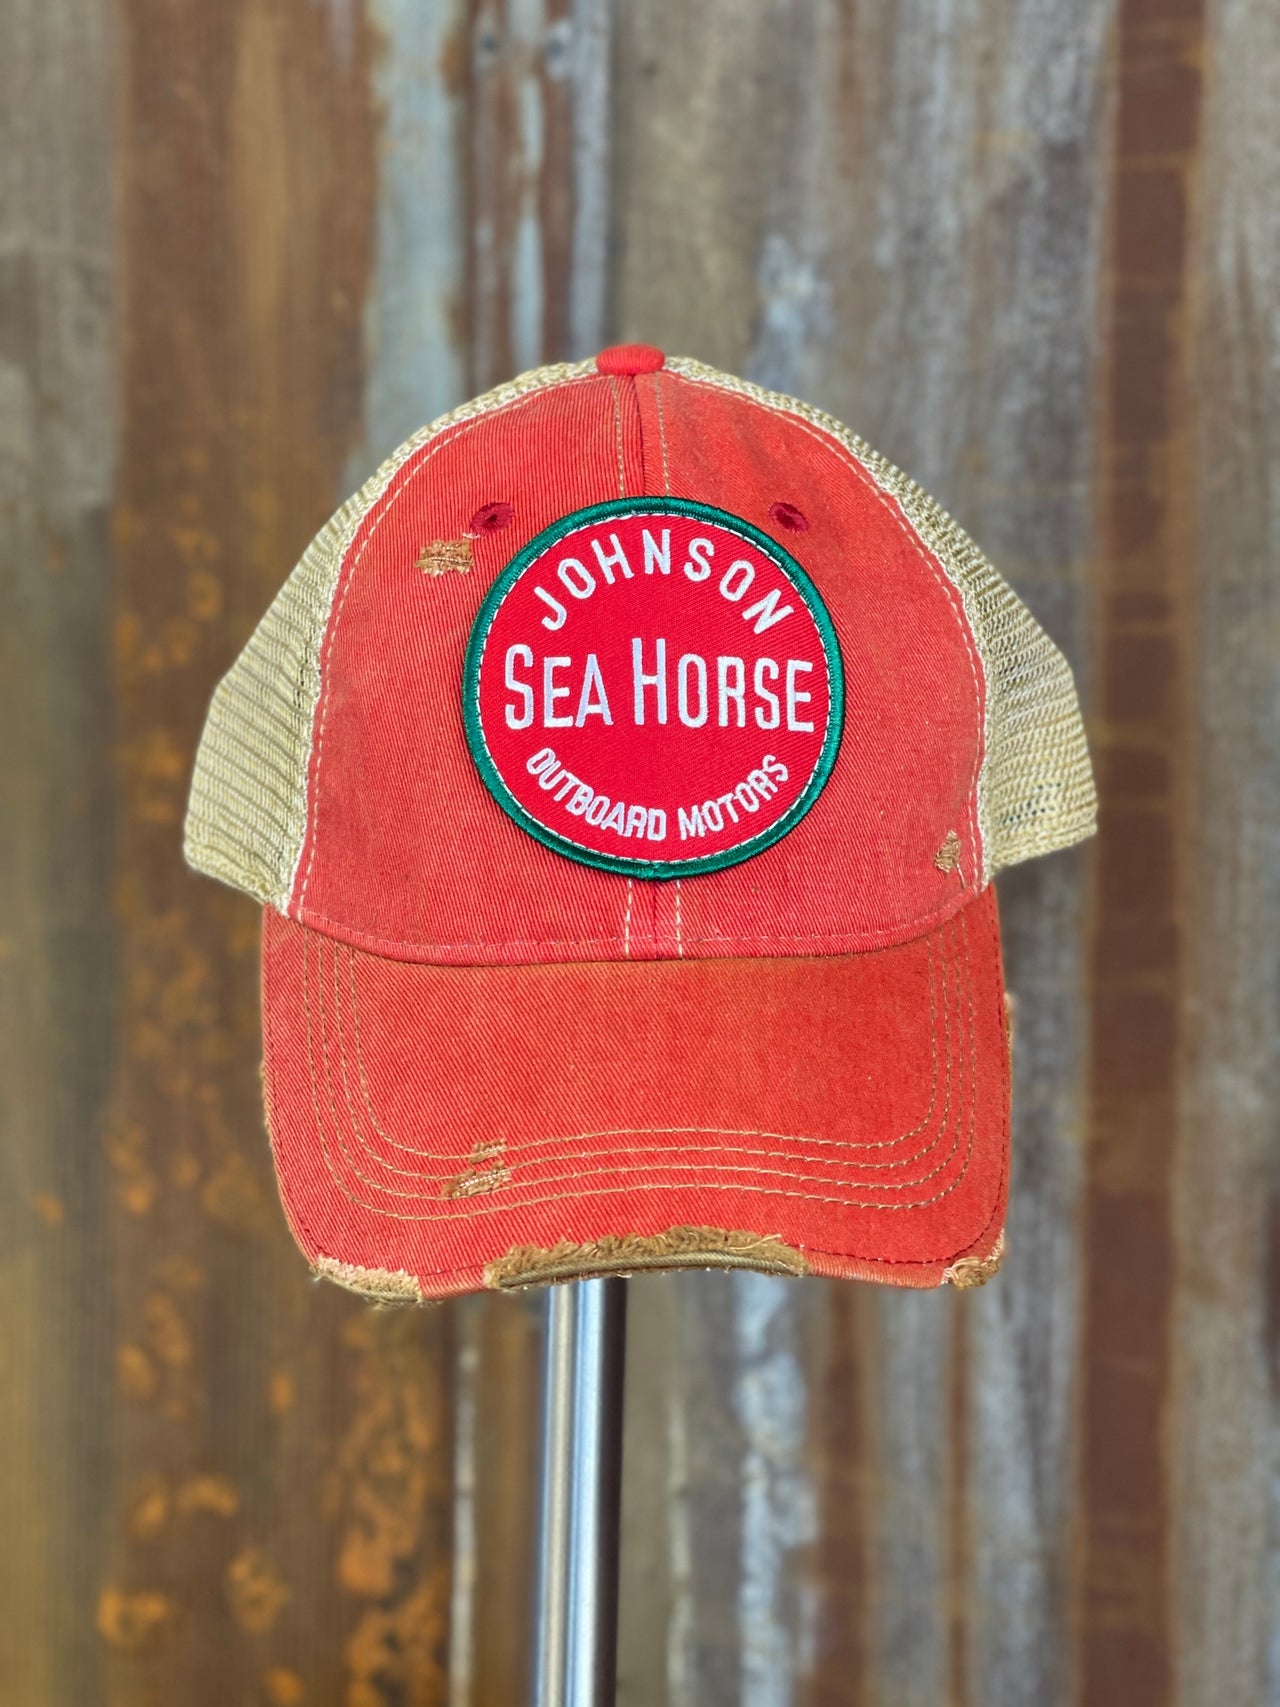 Johnson Seahorse Hat Angry MInnow Vintage